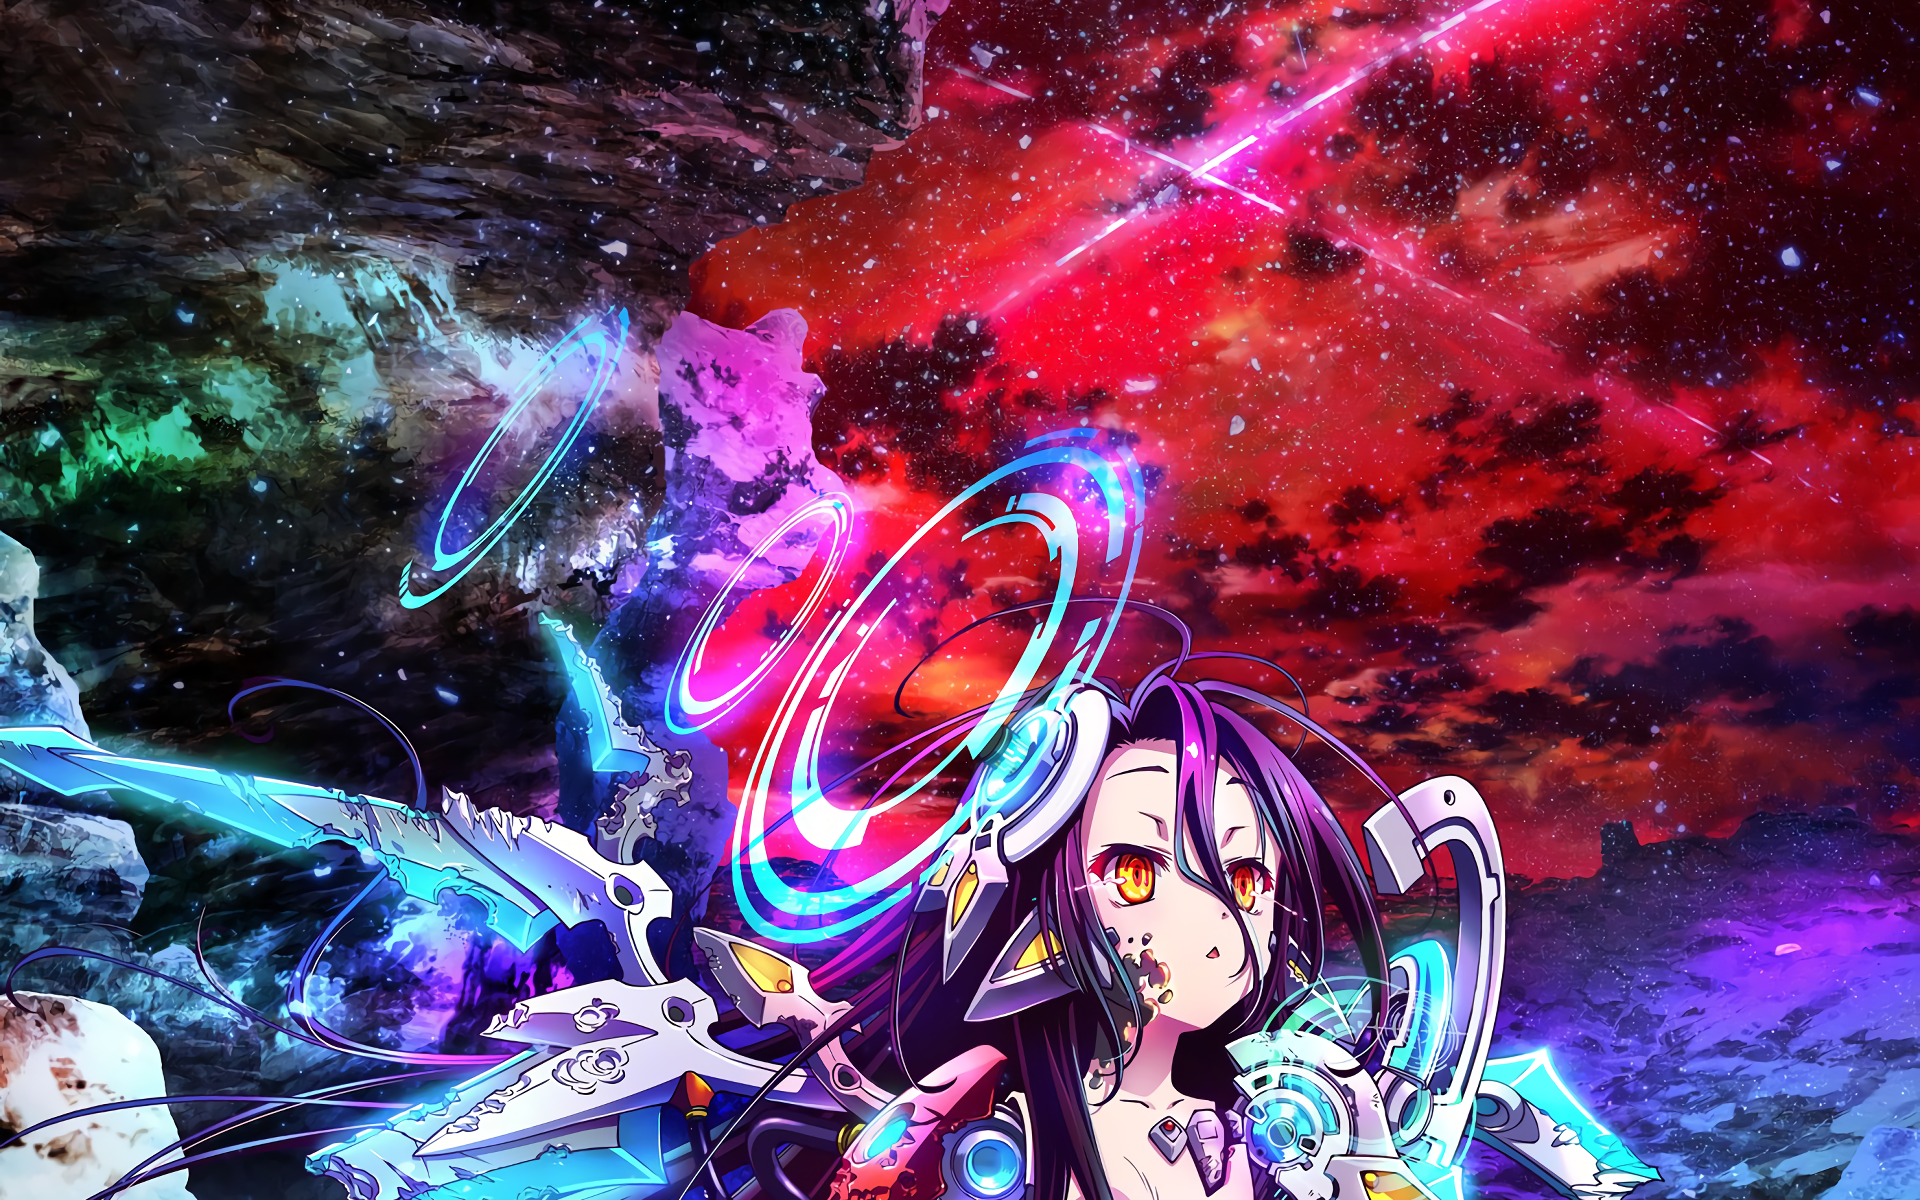 No Game No Life Anime Wallpapers Hd 4k Download For Mobile